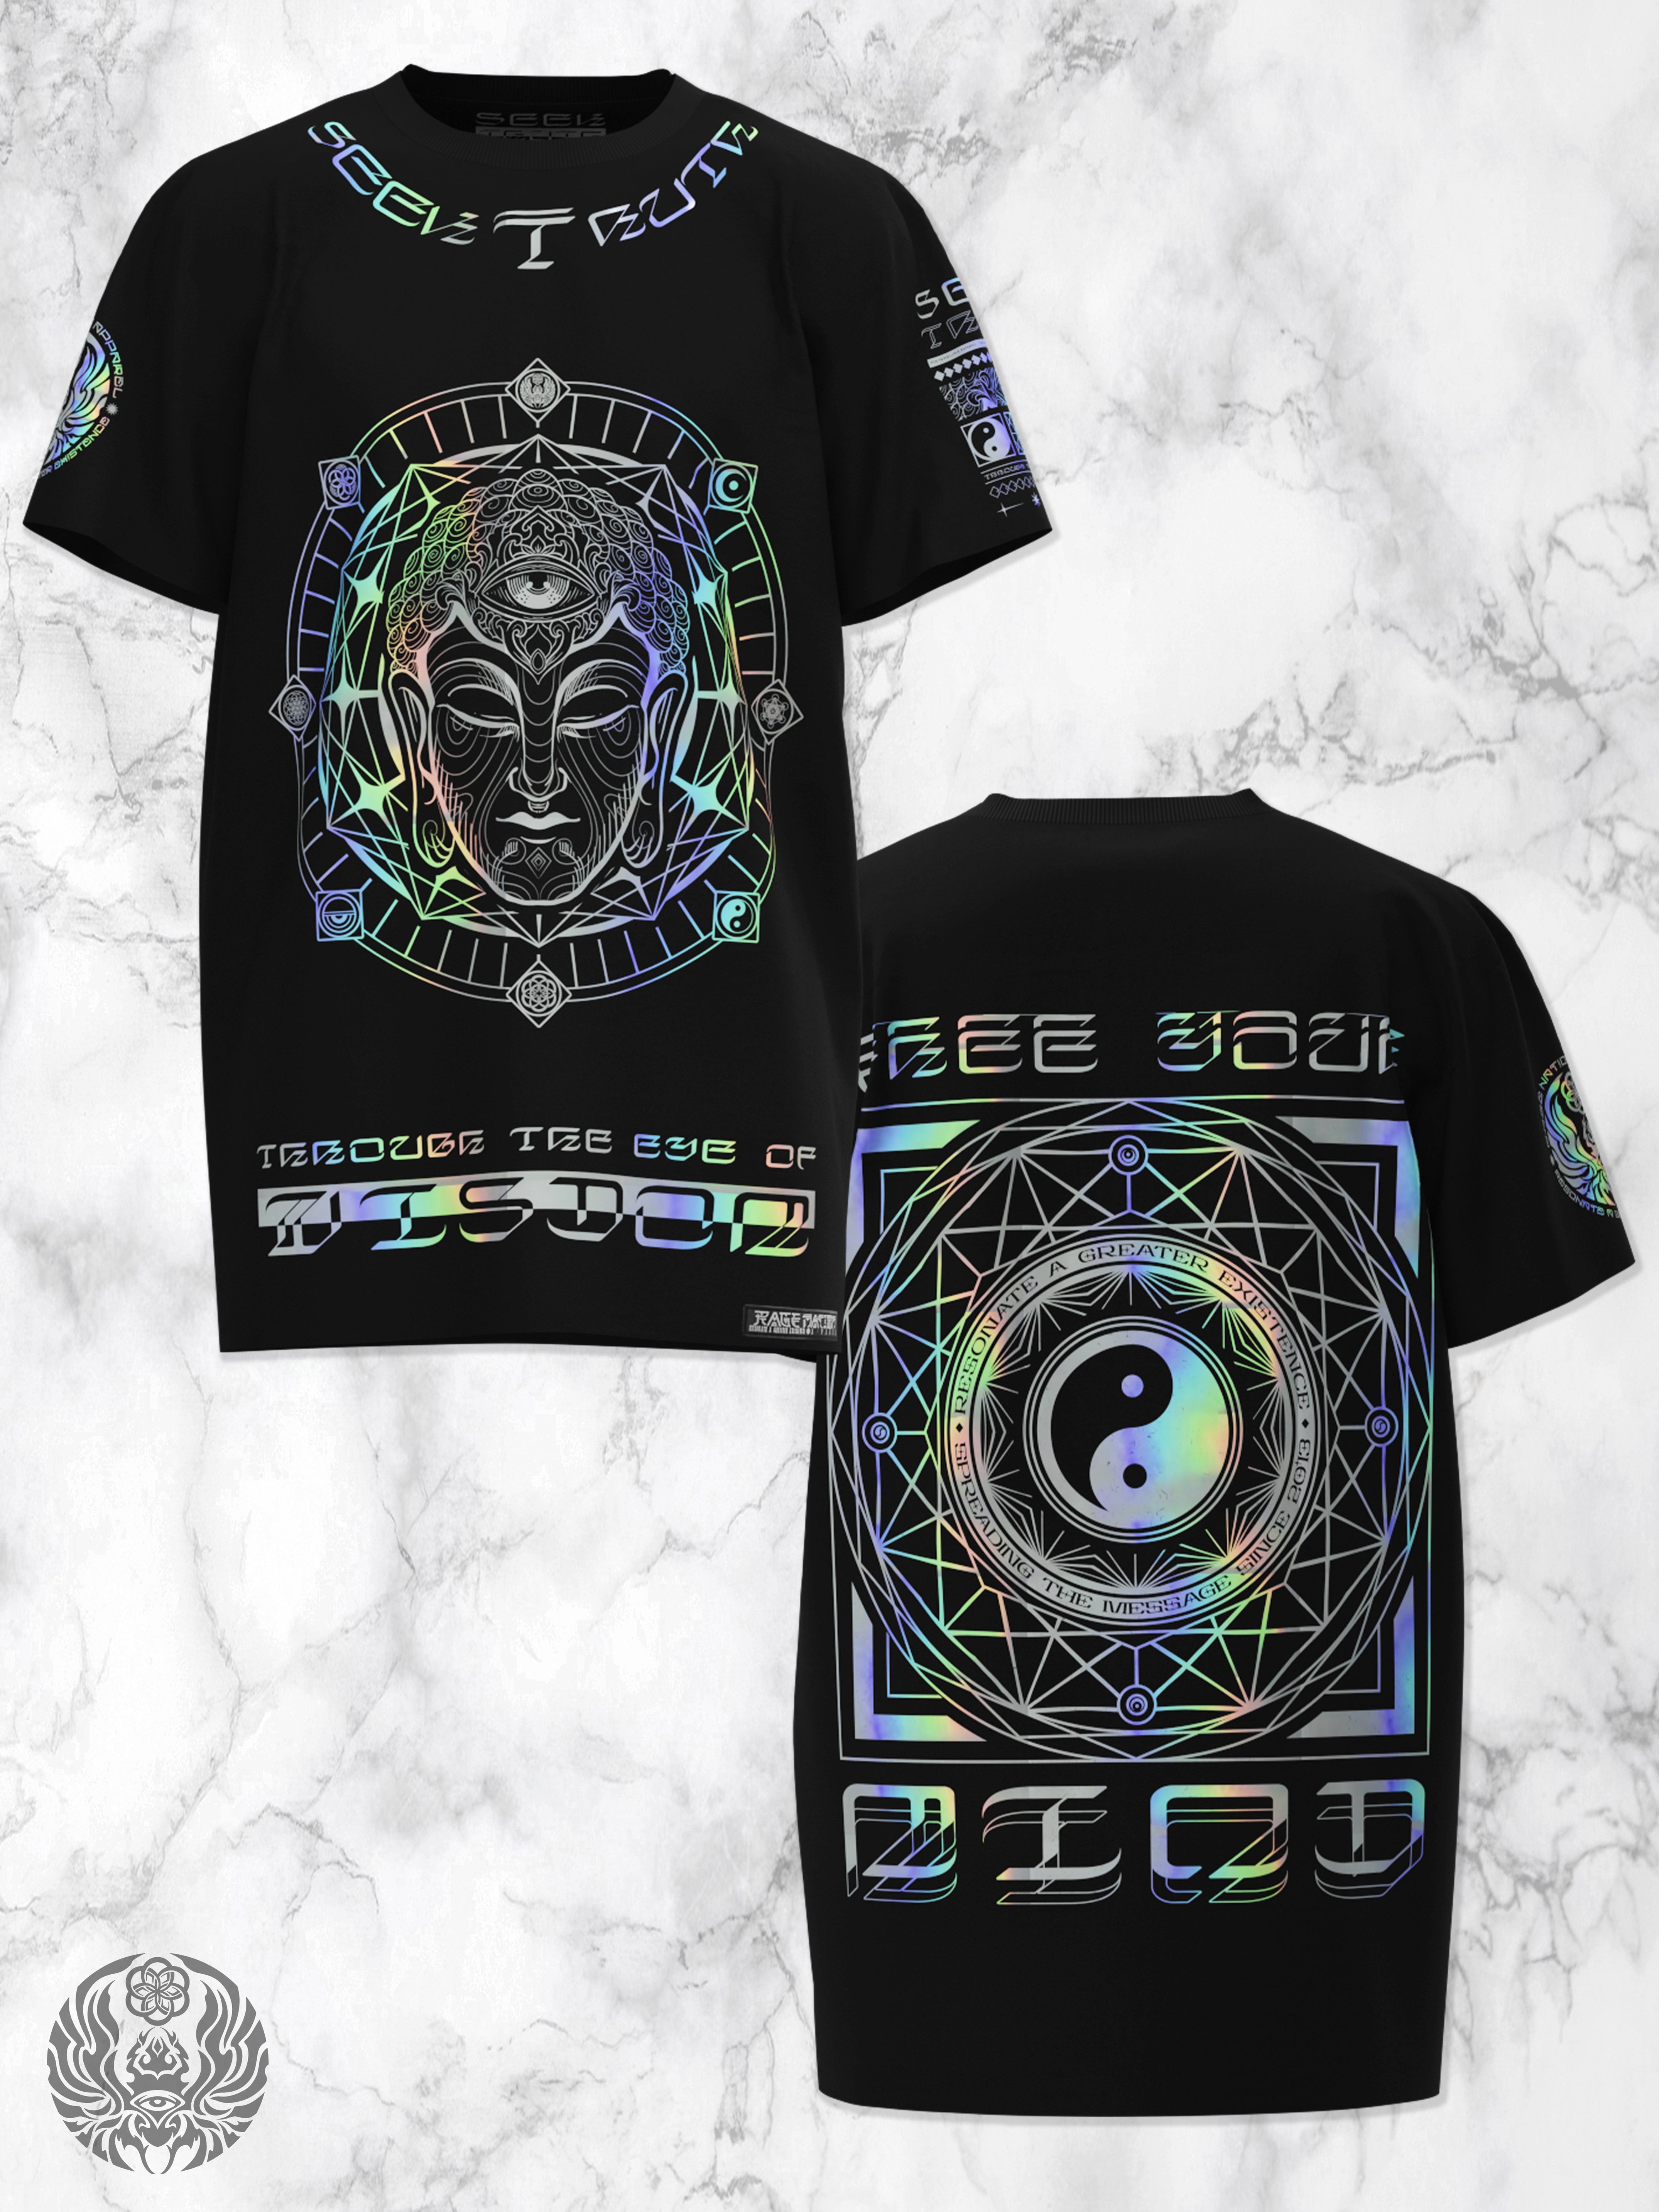 COMING SOON ✦ SEEK TRUTH HOLOGRAPHIC ✦ Premium T-Shirt Coming Soon 